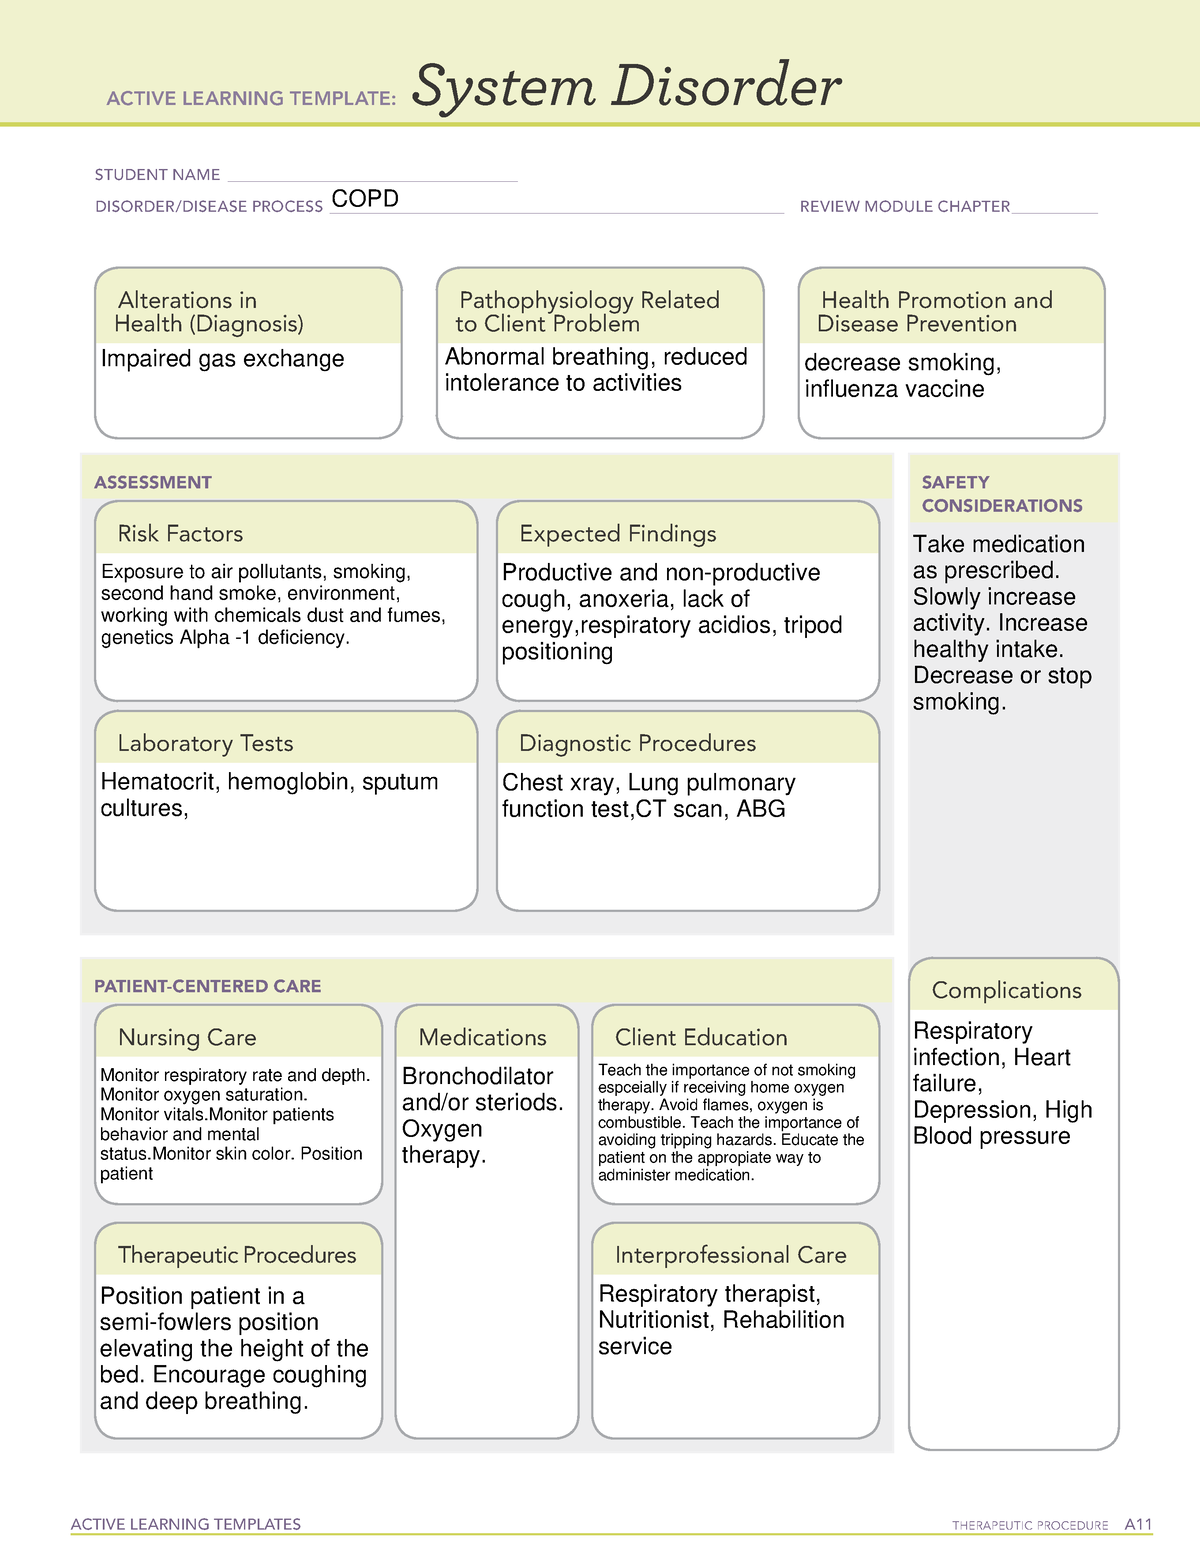 COPDActive Learning Template ACTIVE LEARNING TEMPLATES THERAPEUTIC